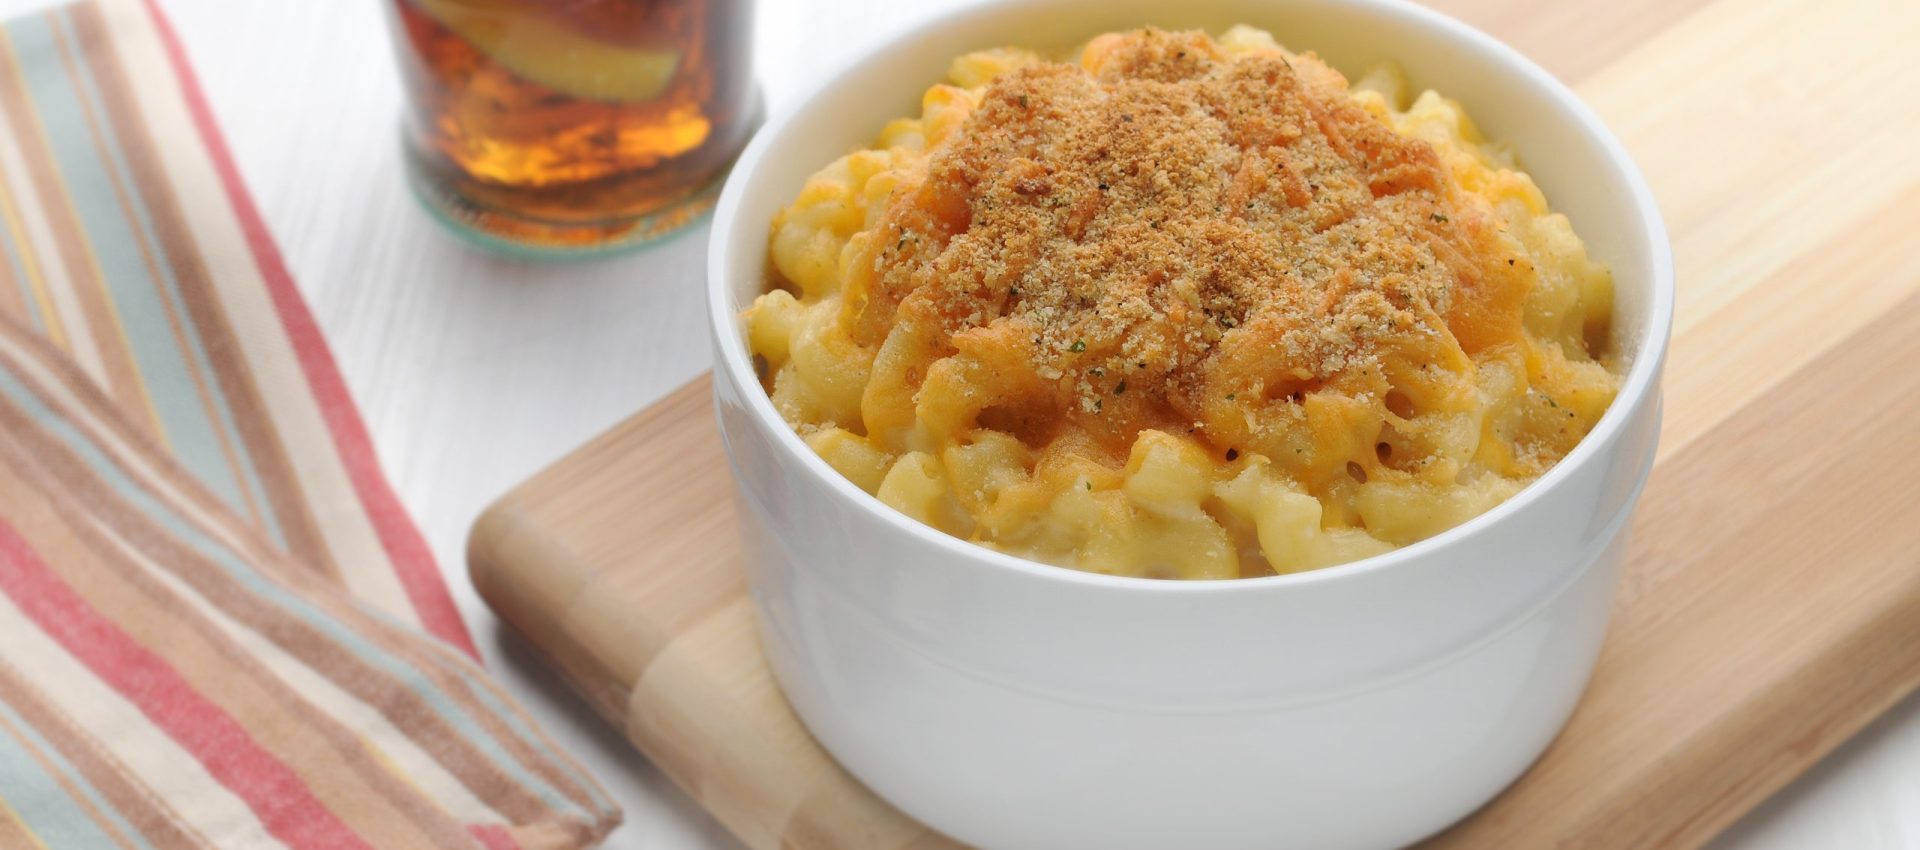 Baked-Mac-with-Double-cheese-1-HR-scaled-1920x850 Baked Cheddar & Swiss Macaroni and Cheese